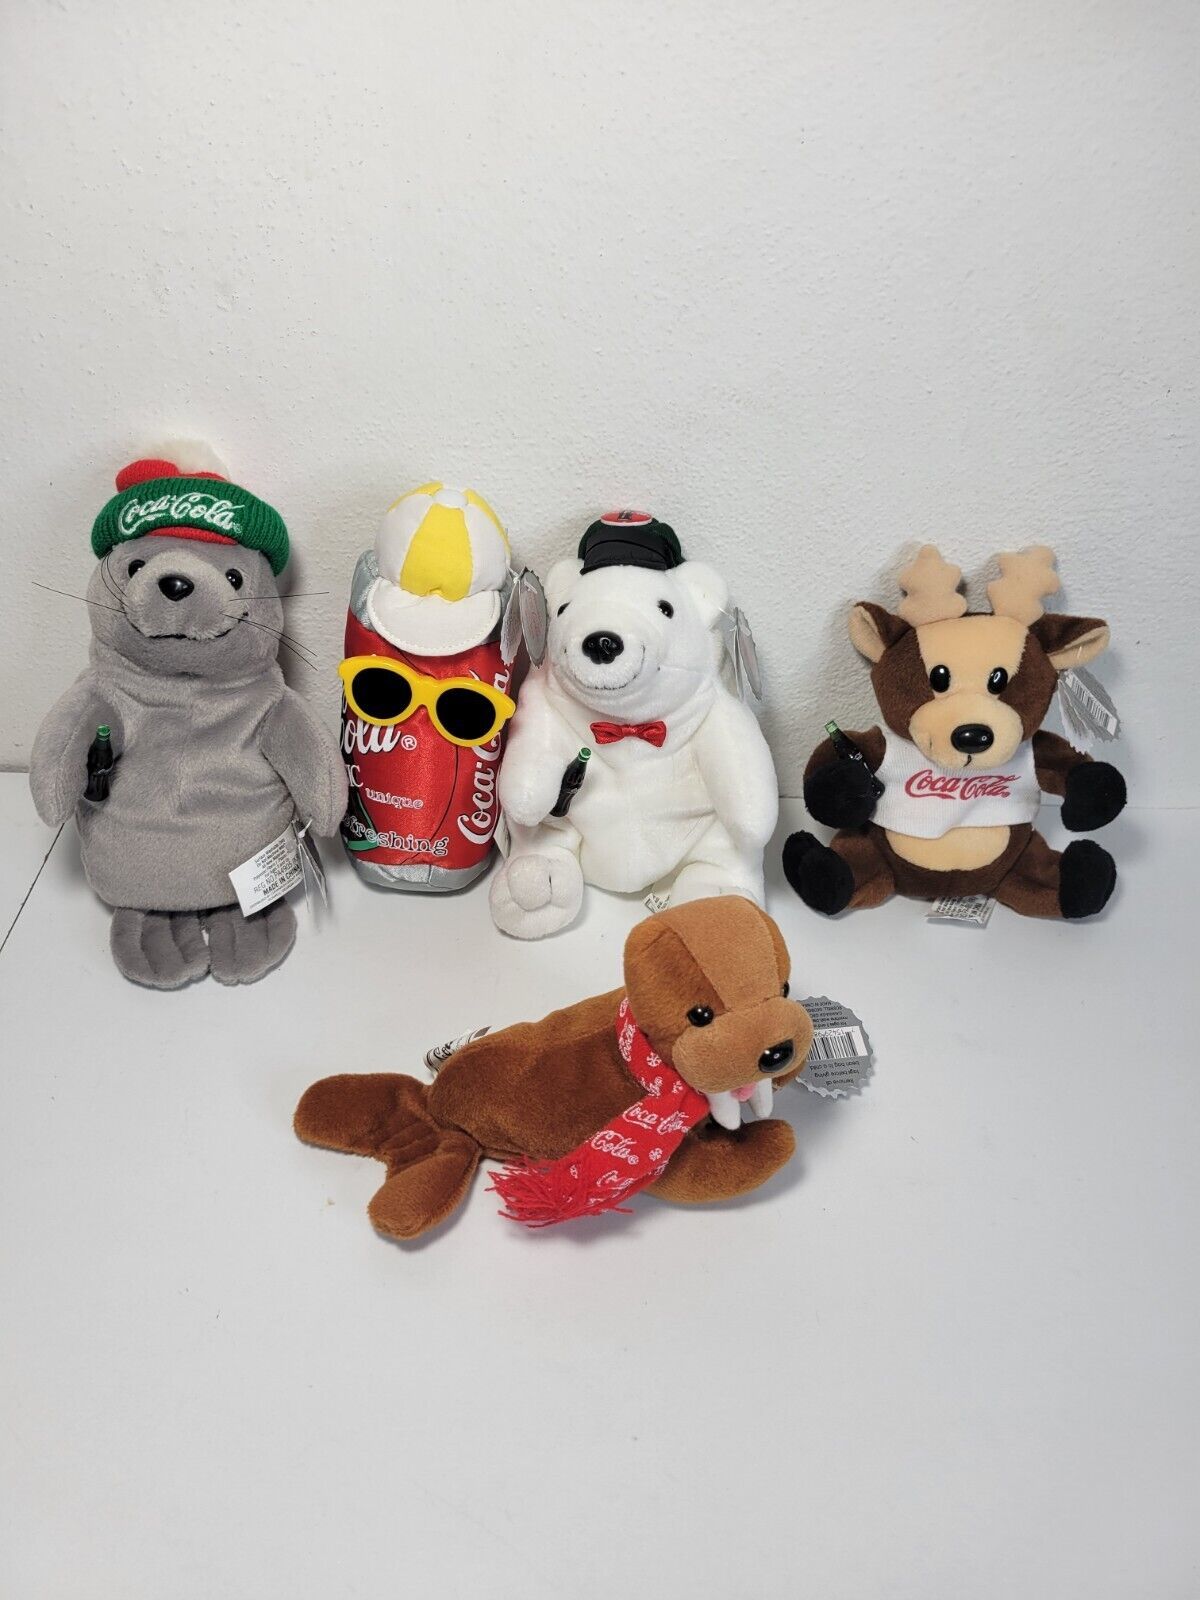 1997 Coca Cola Plush Beanies Collectibles (Set Of 5) with tags - $19.49